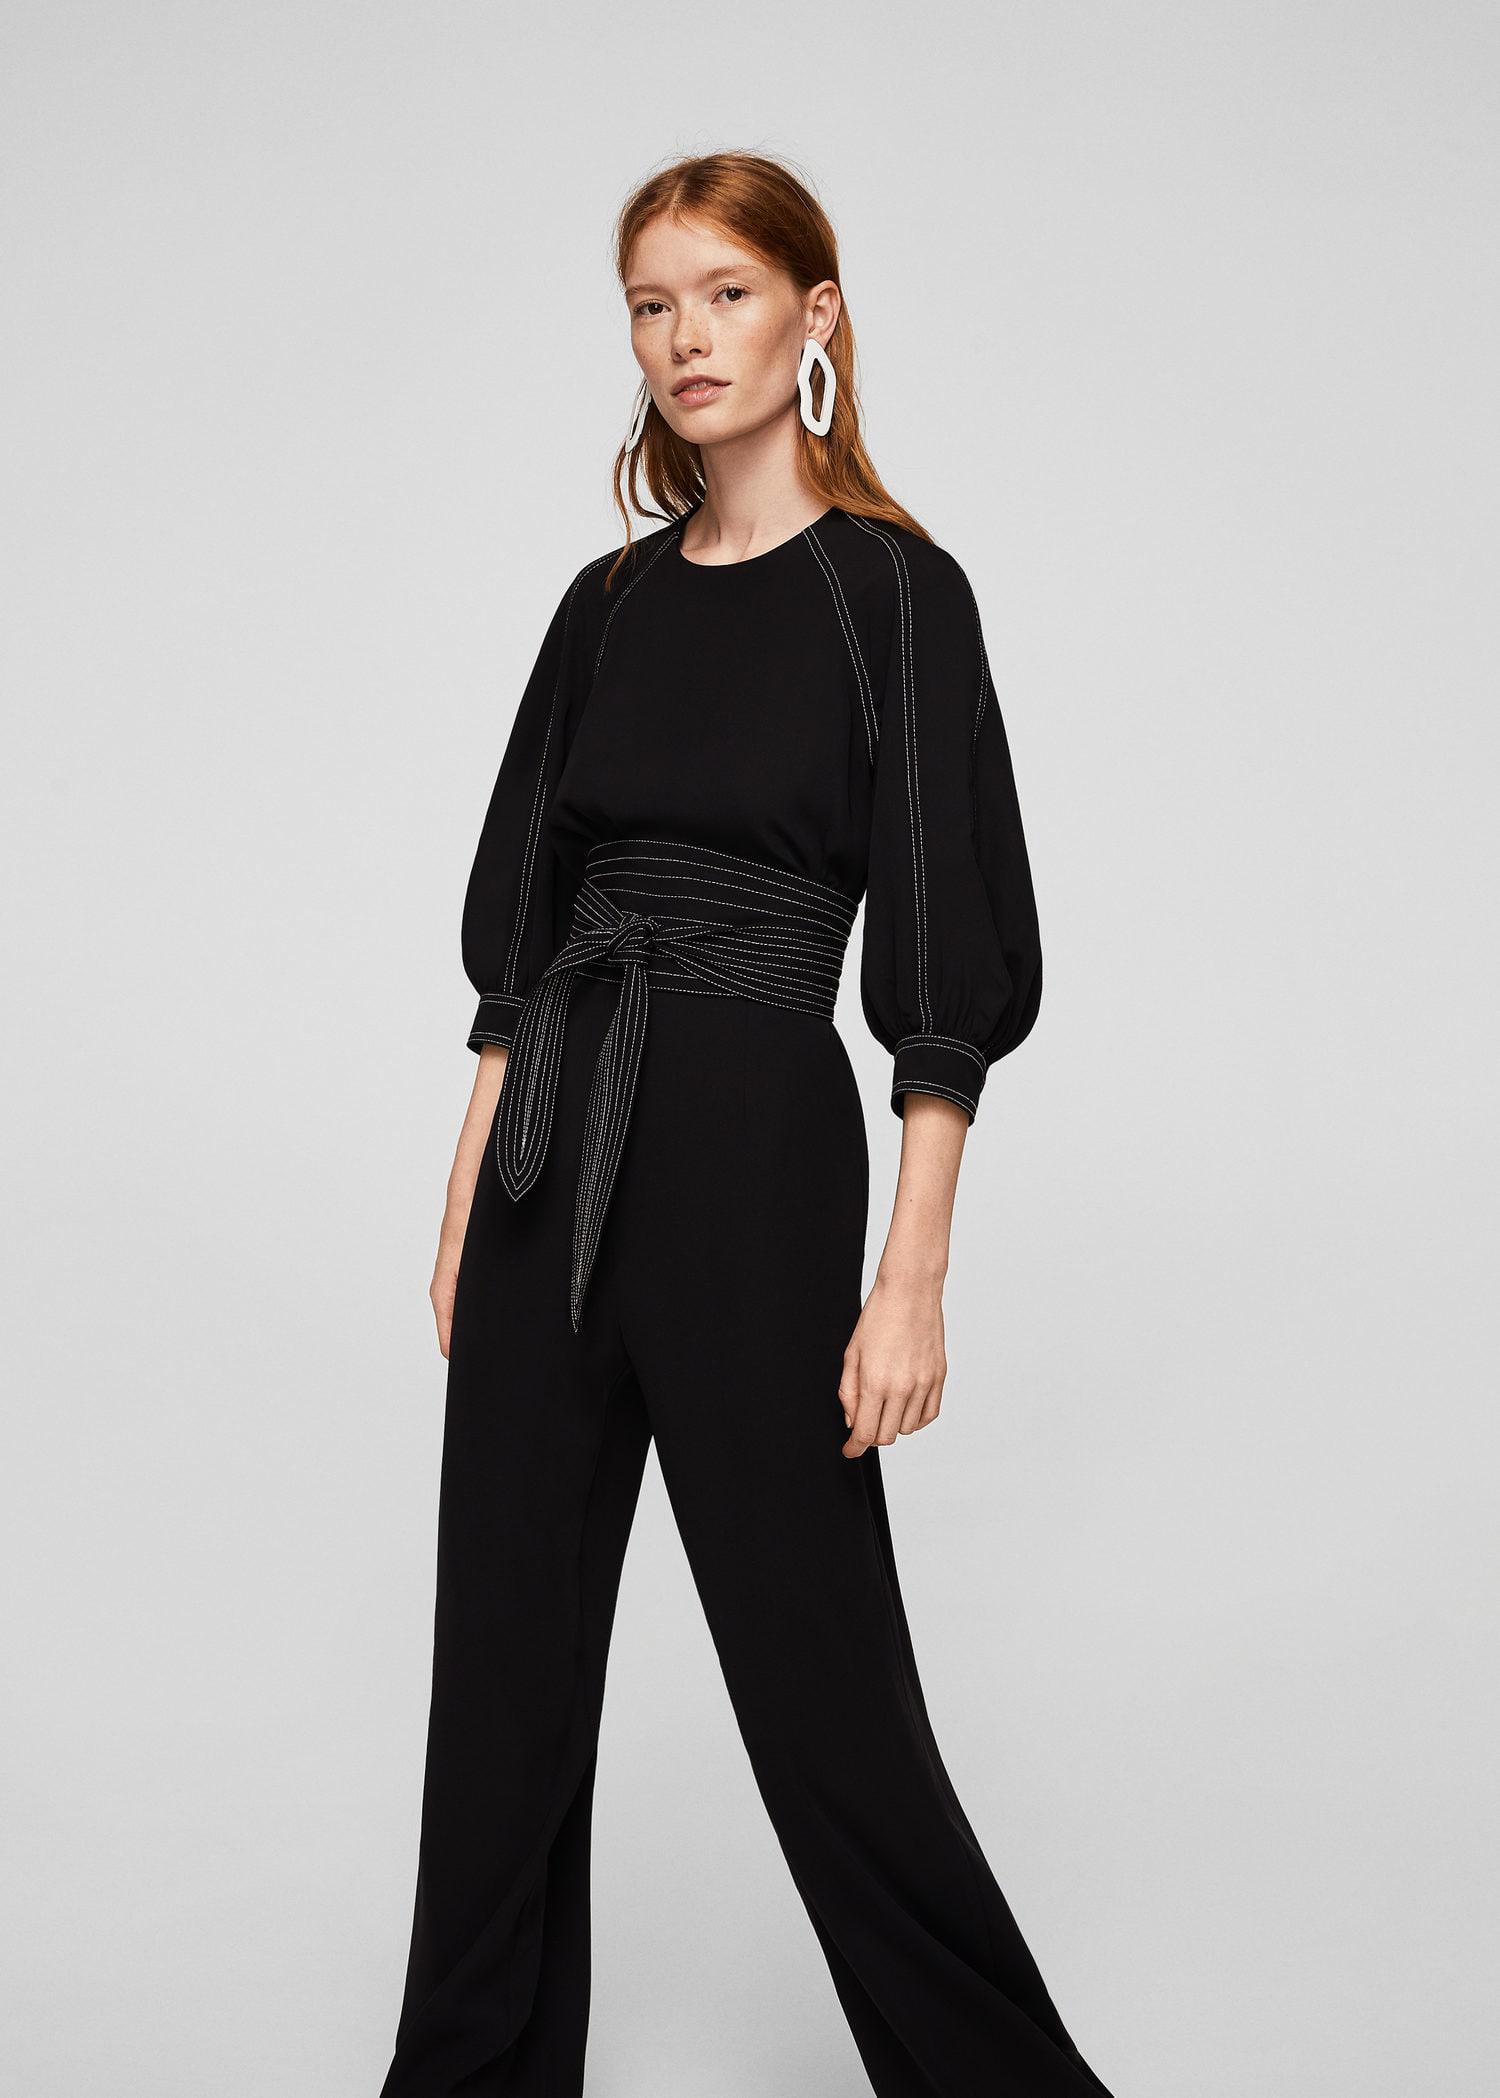 Mango Synthetic Contrast Seam Jumpsuit in Black - Lyst